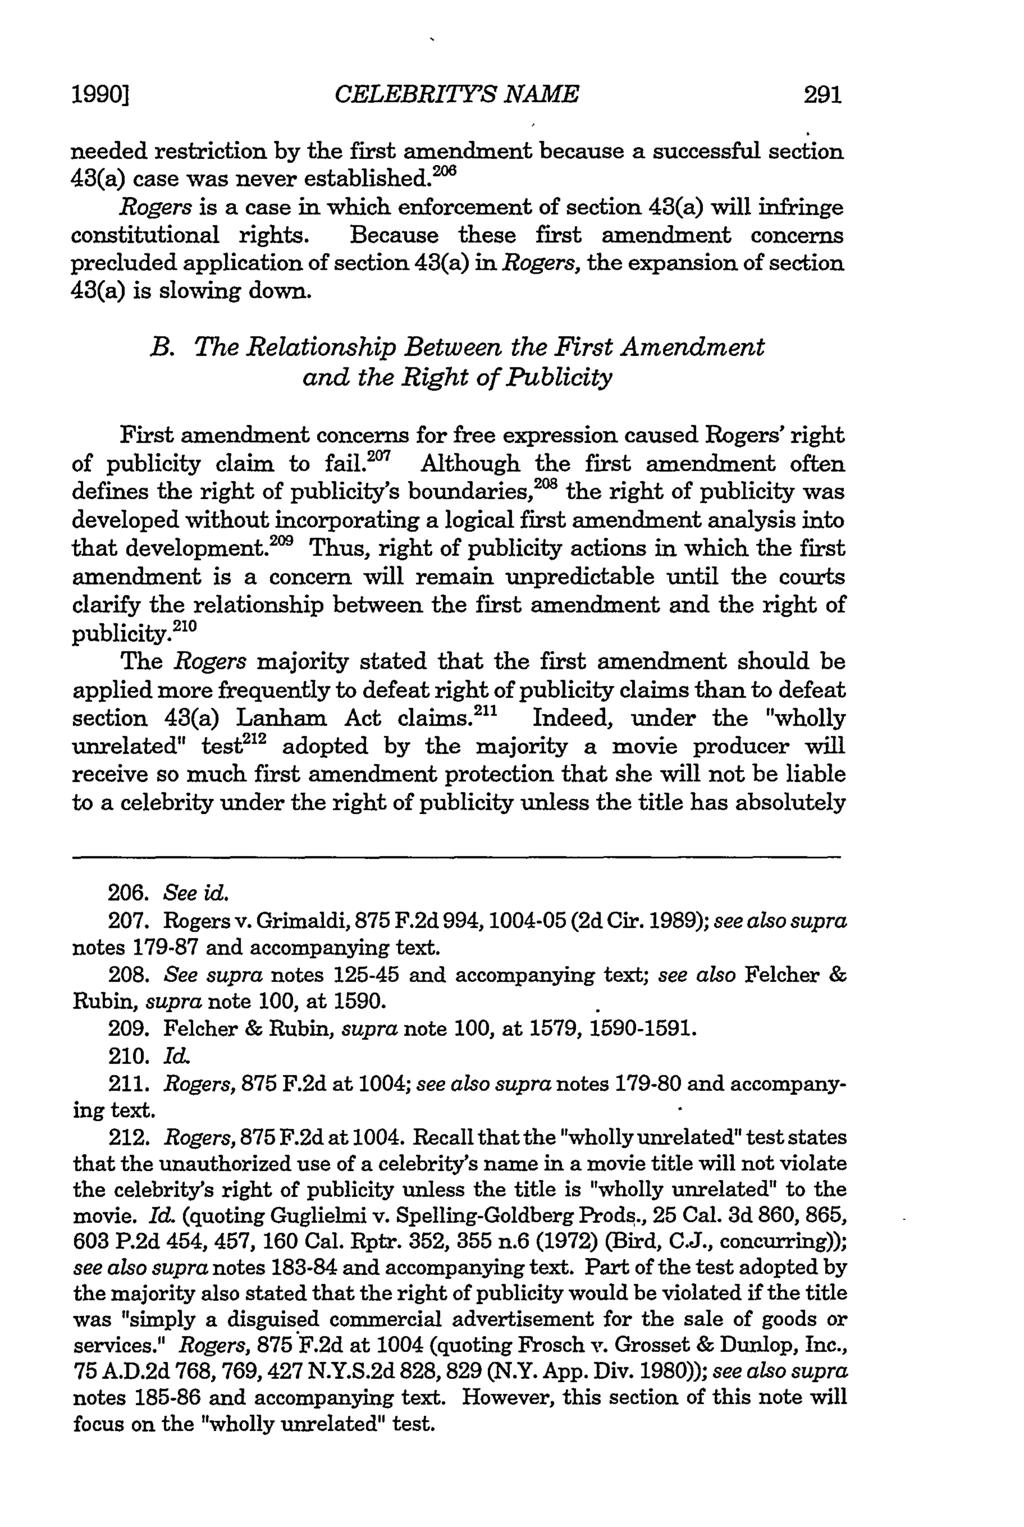 1990] Wawrzyniak: Wawrzyniak: Unauthorized Use of Celebrity's Name CELEBRITY'S NAME needed restriction by the first amendment because a successful section 43(a) case was never established.